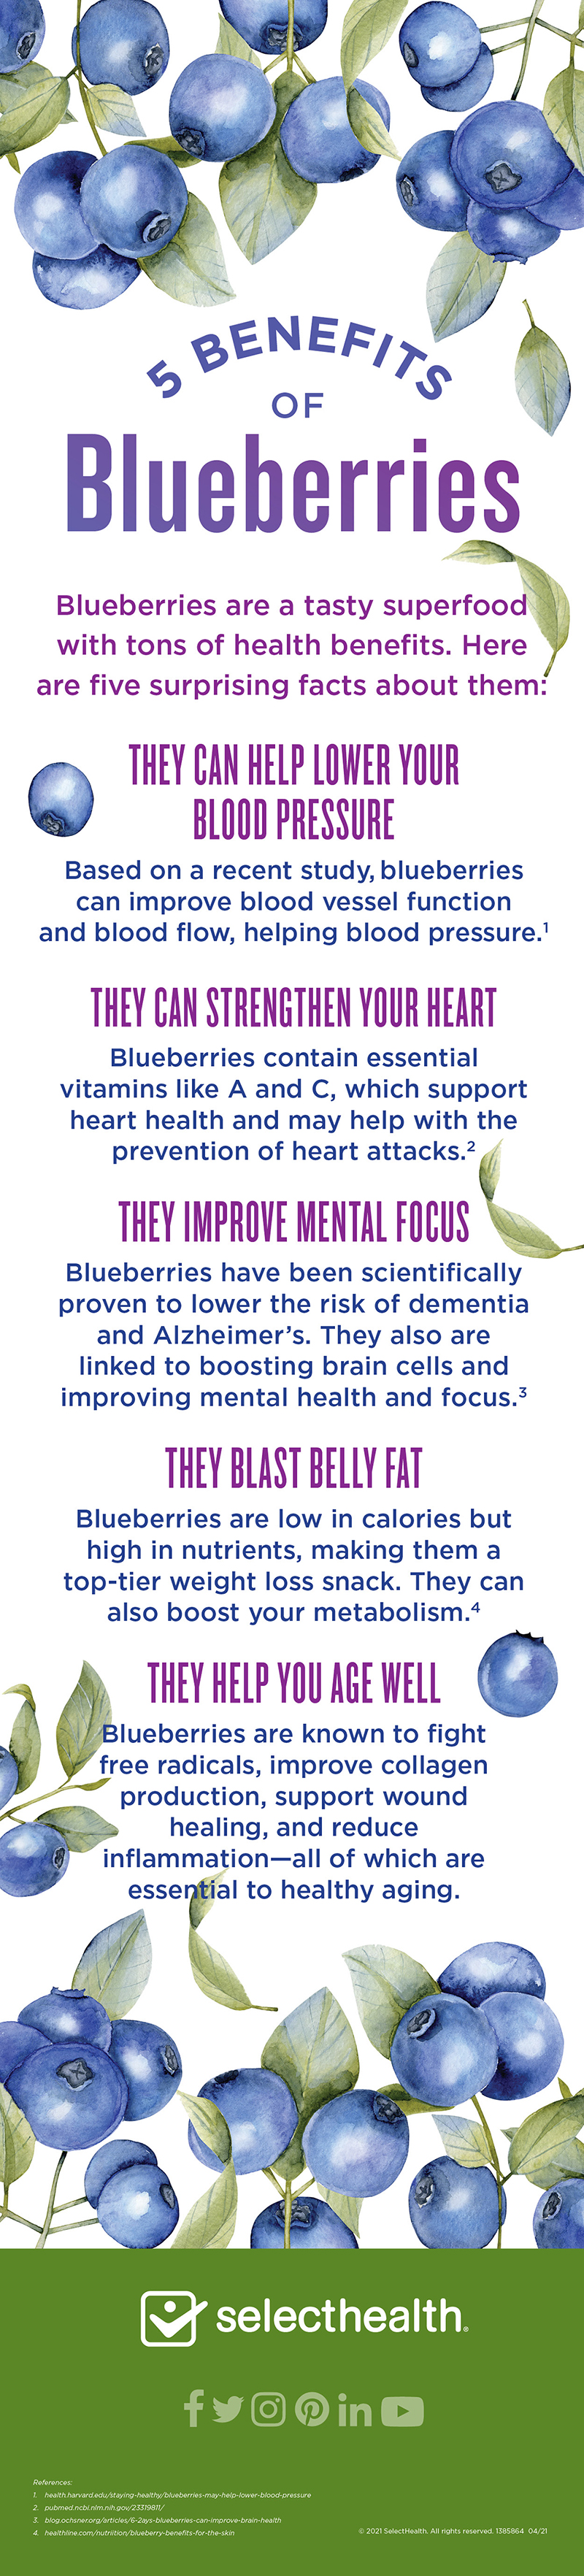 5 Benefits of Blueberries, Surprising facts about blueberries, blueberries, facts about blueberries, blood pressure, blood vessel